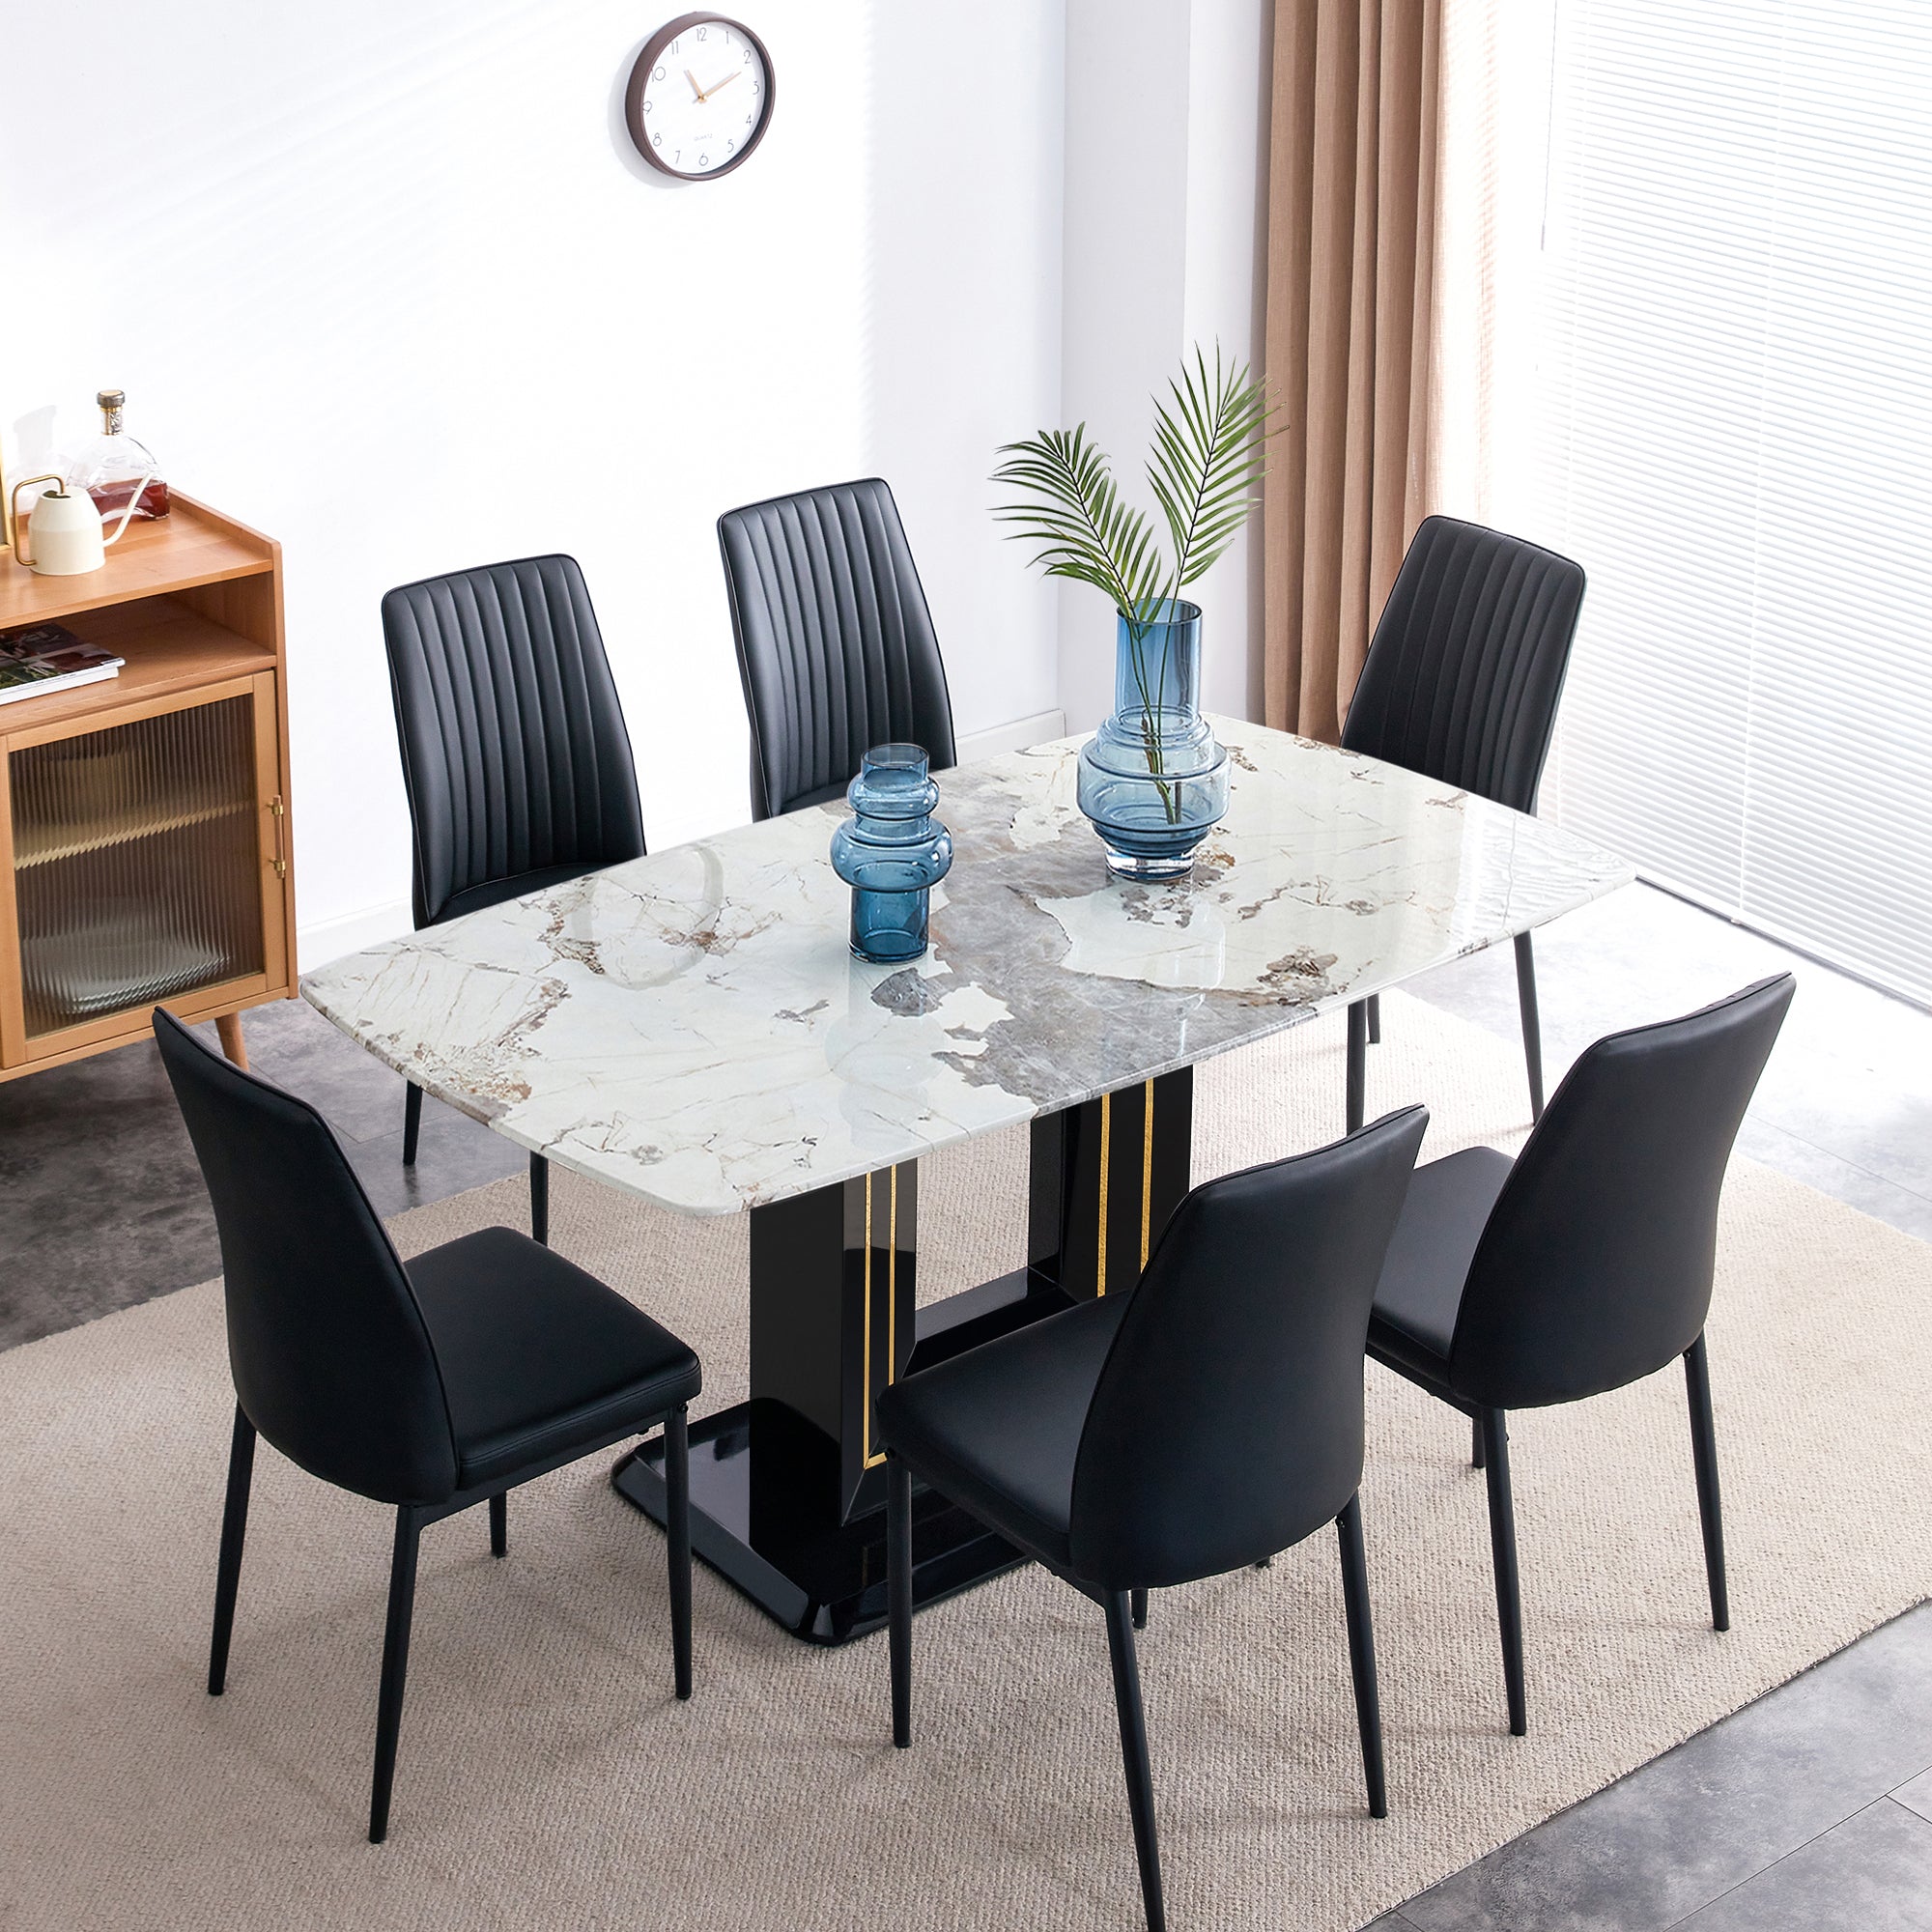 🆓🚛 7-Piece Faux Marble Dining Table Set, Modern White Faux Marble Glass Rectangular Kitchen/Dining Room Table with MDF Base & 6 Chairs